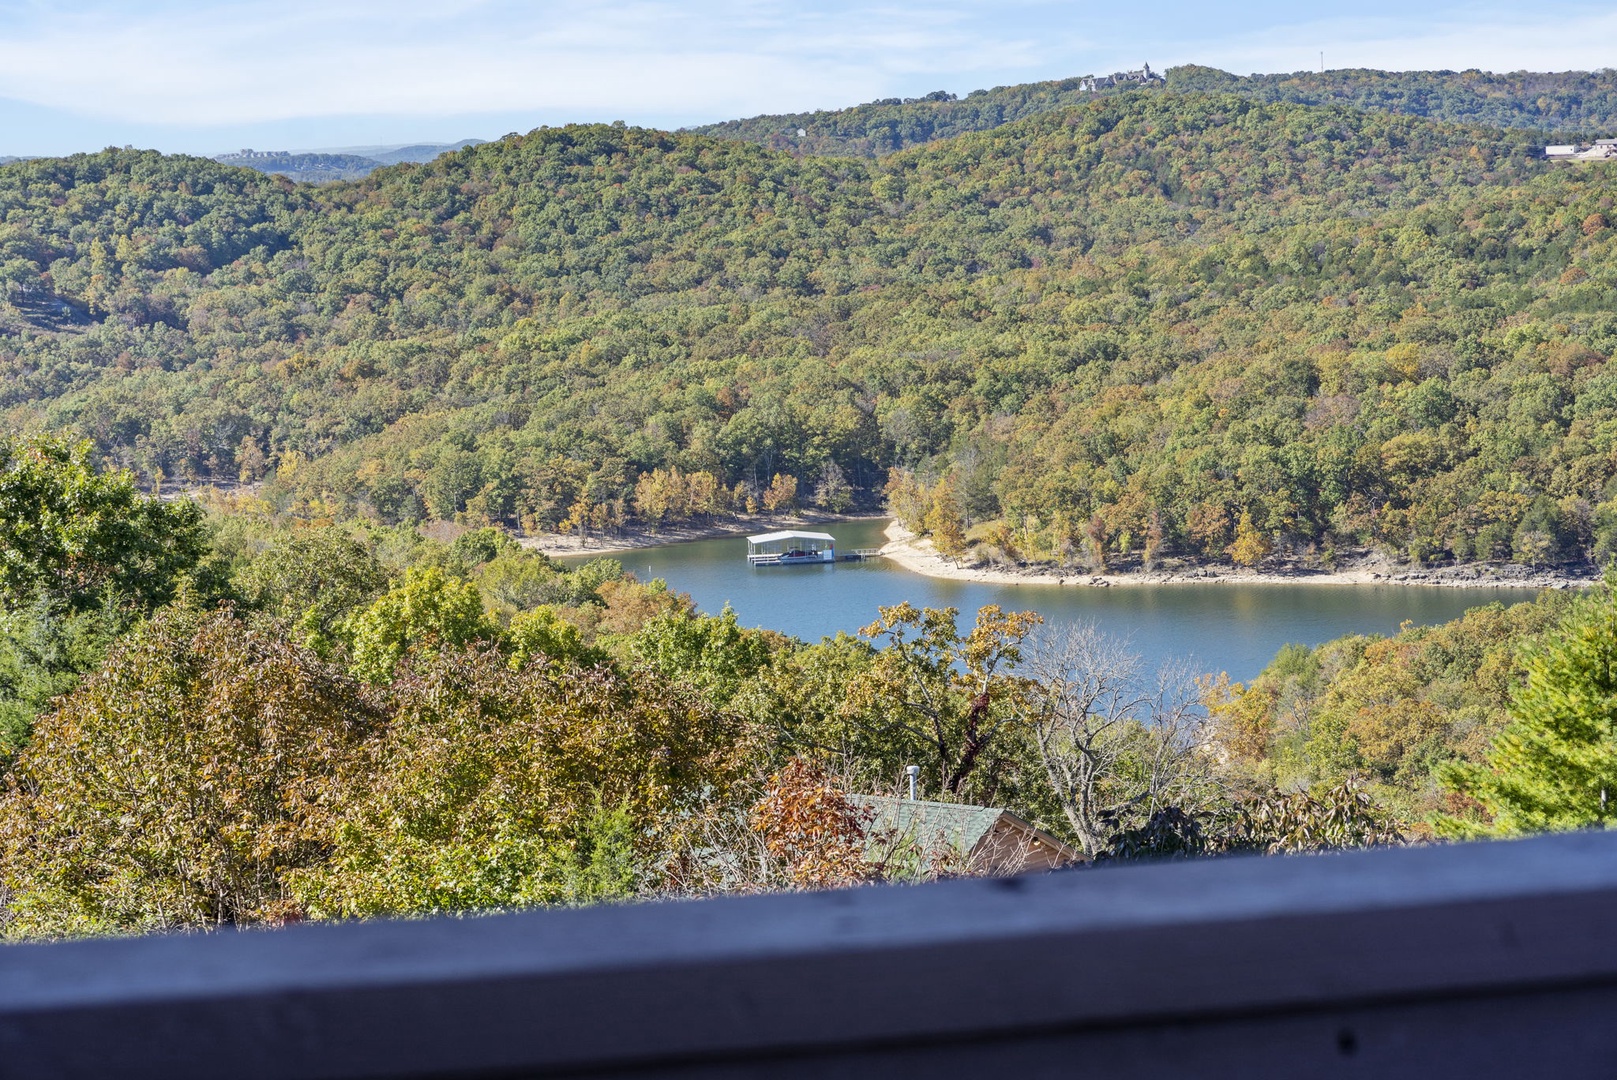 Soak in views of Table Rock Lake on the balcony!